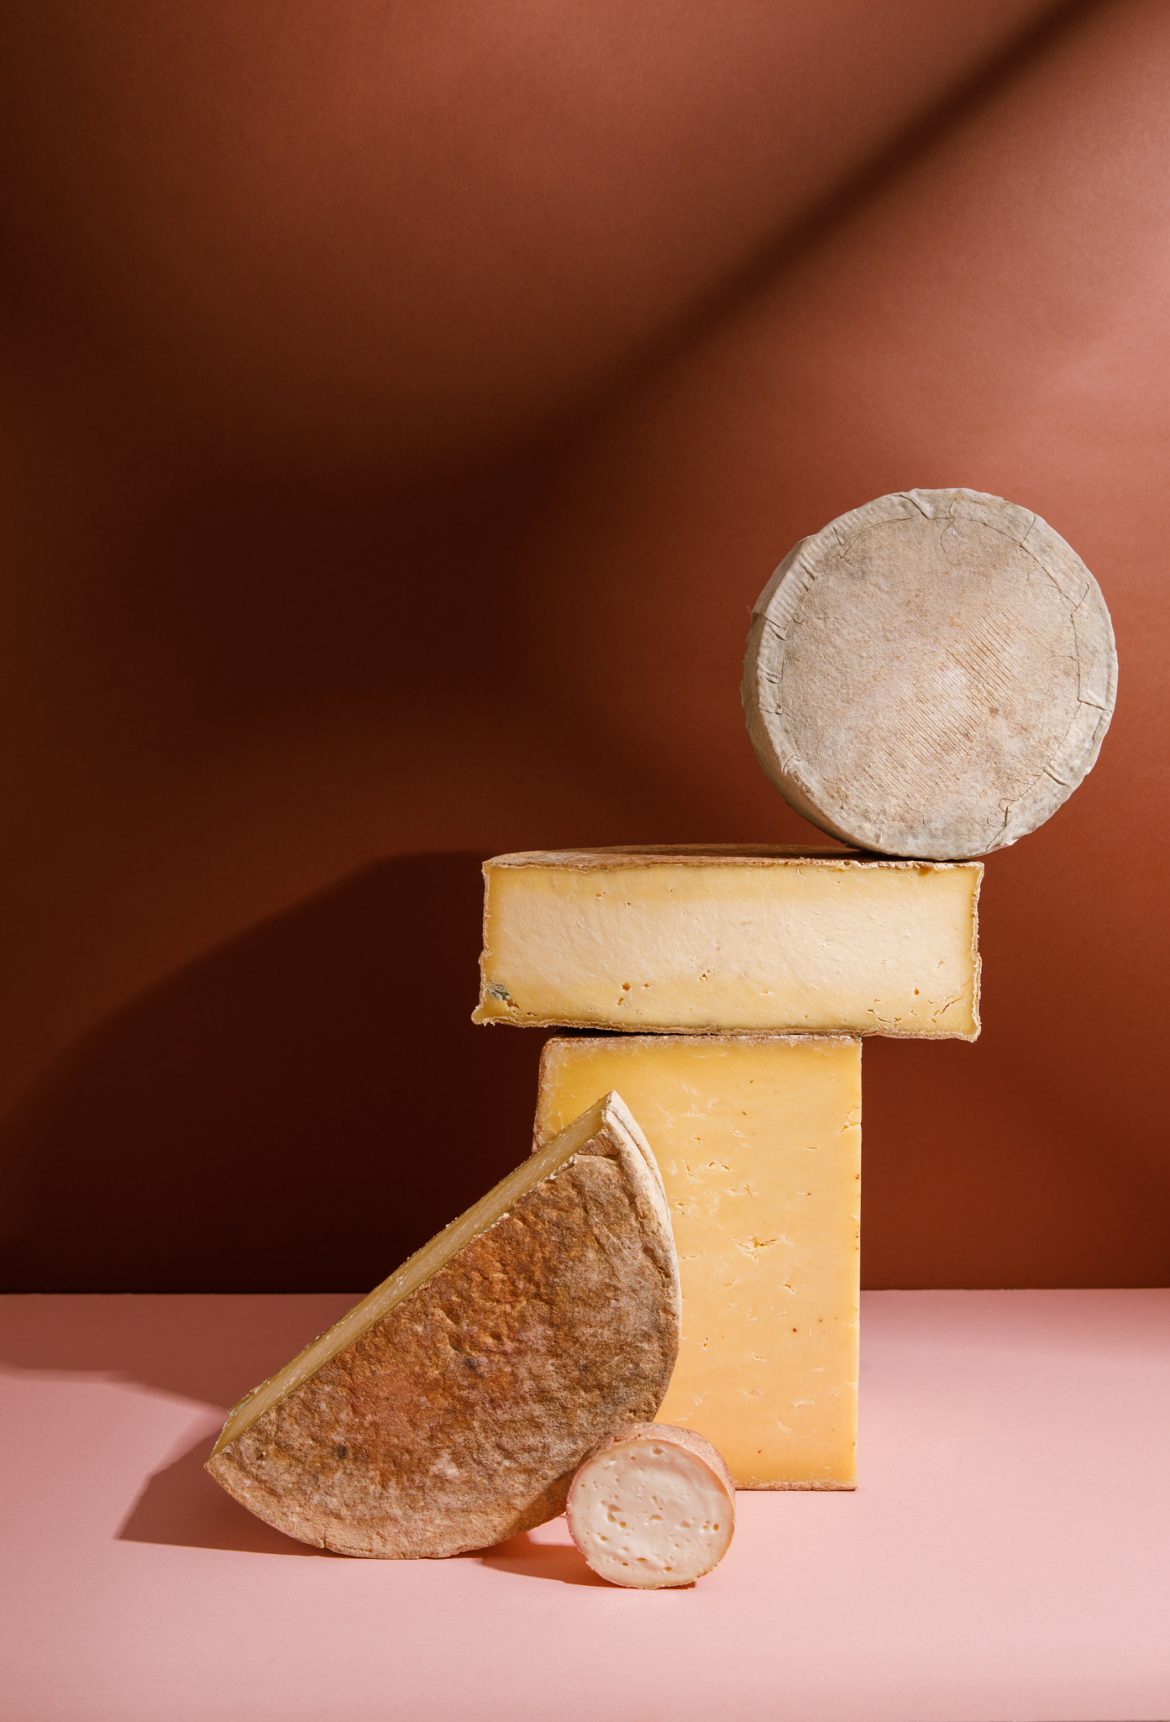 photograph of an abstract sculpture made from cheese. 4 large pieces of cheese are stacked to form an off centre tower